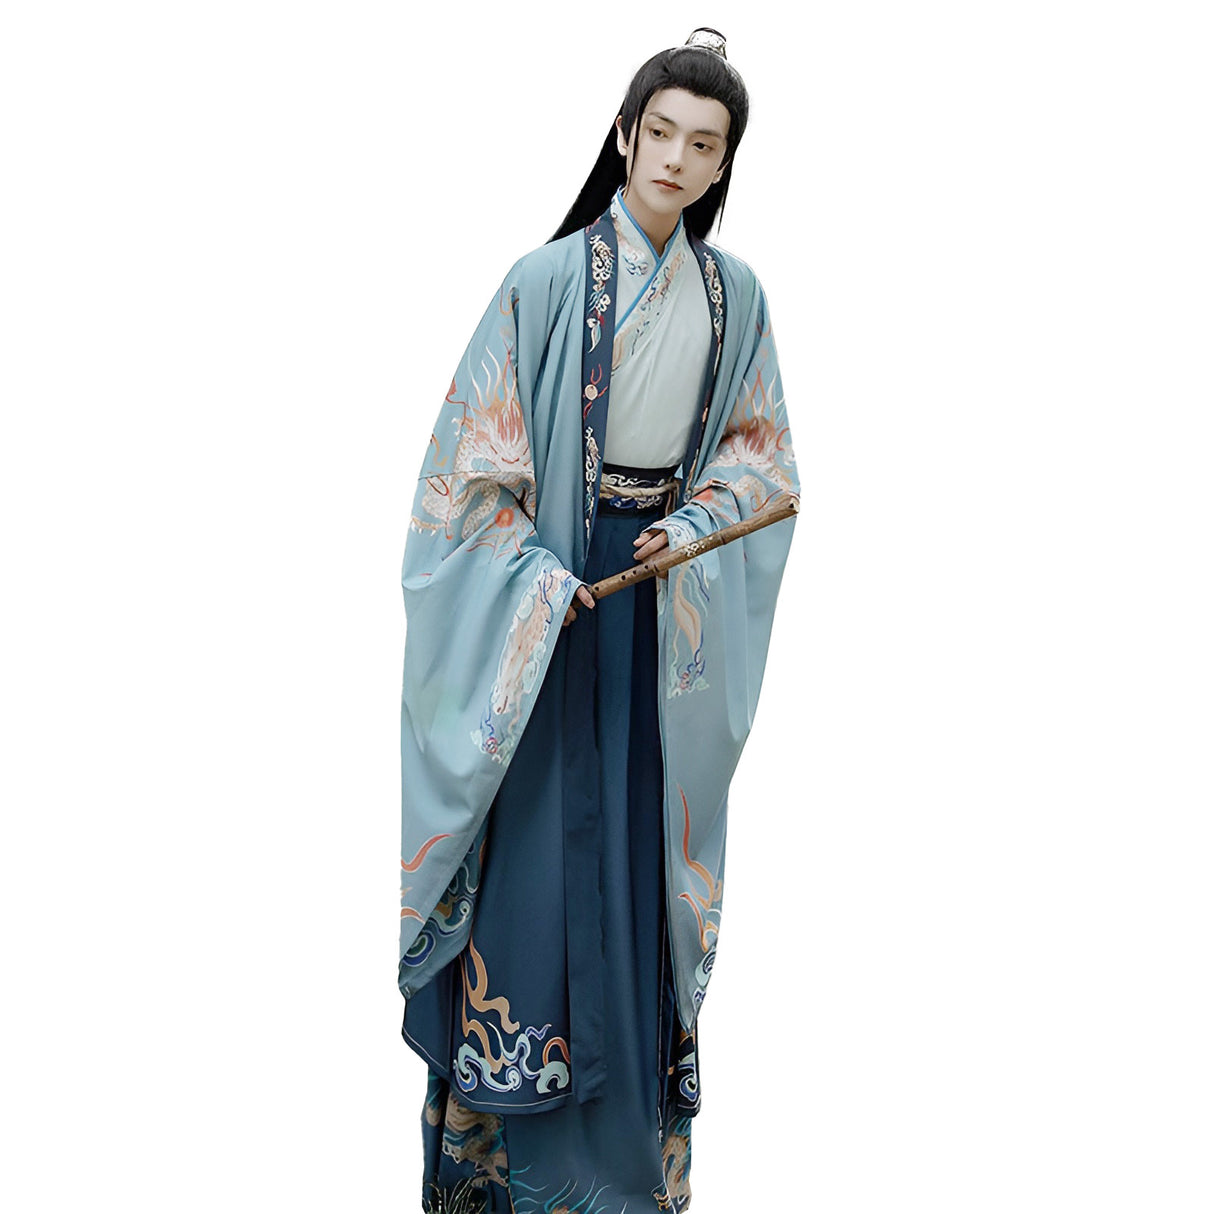 Hanfu male traditional Chinese clothing in blue with dragon patterns